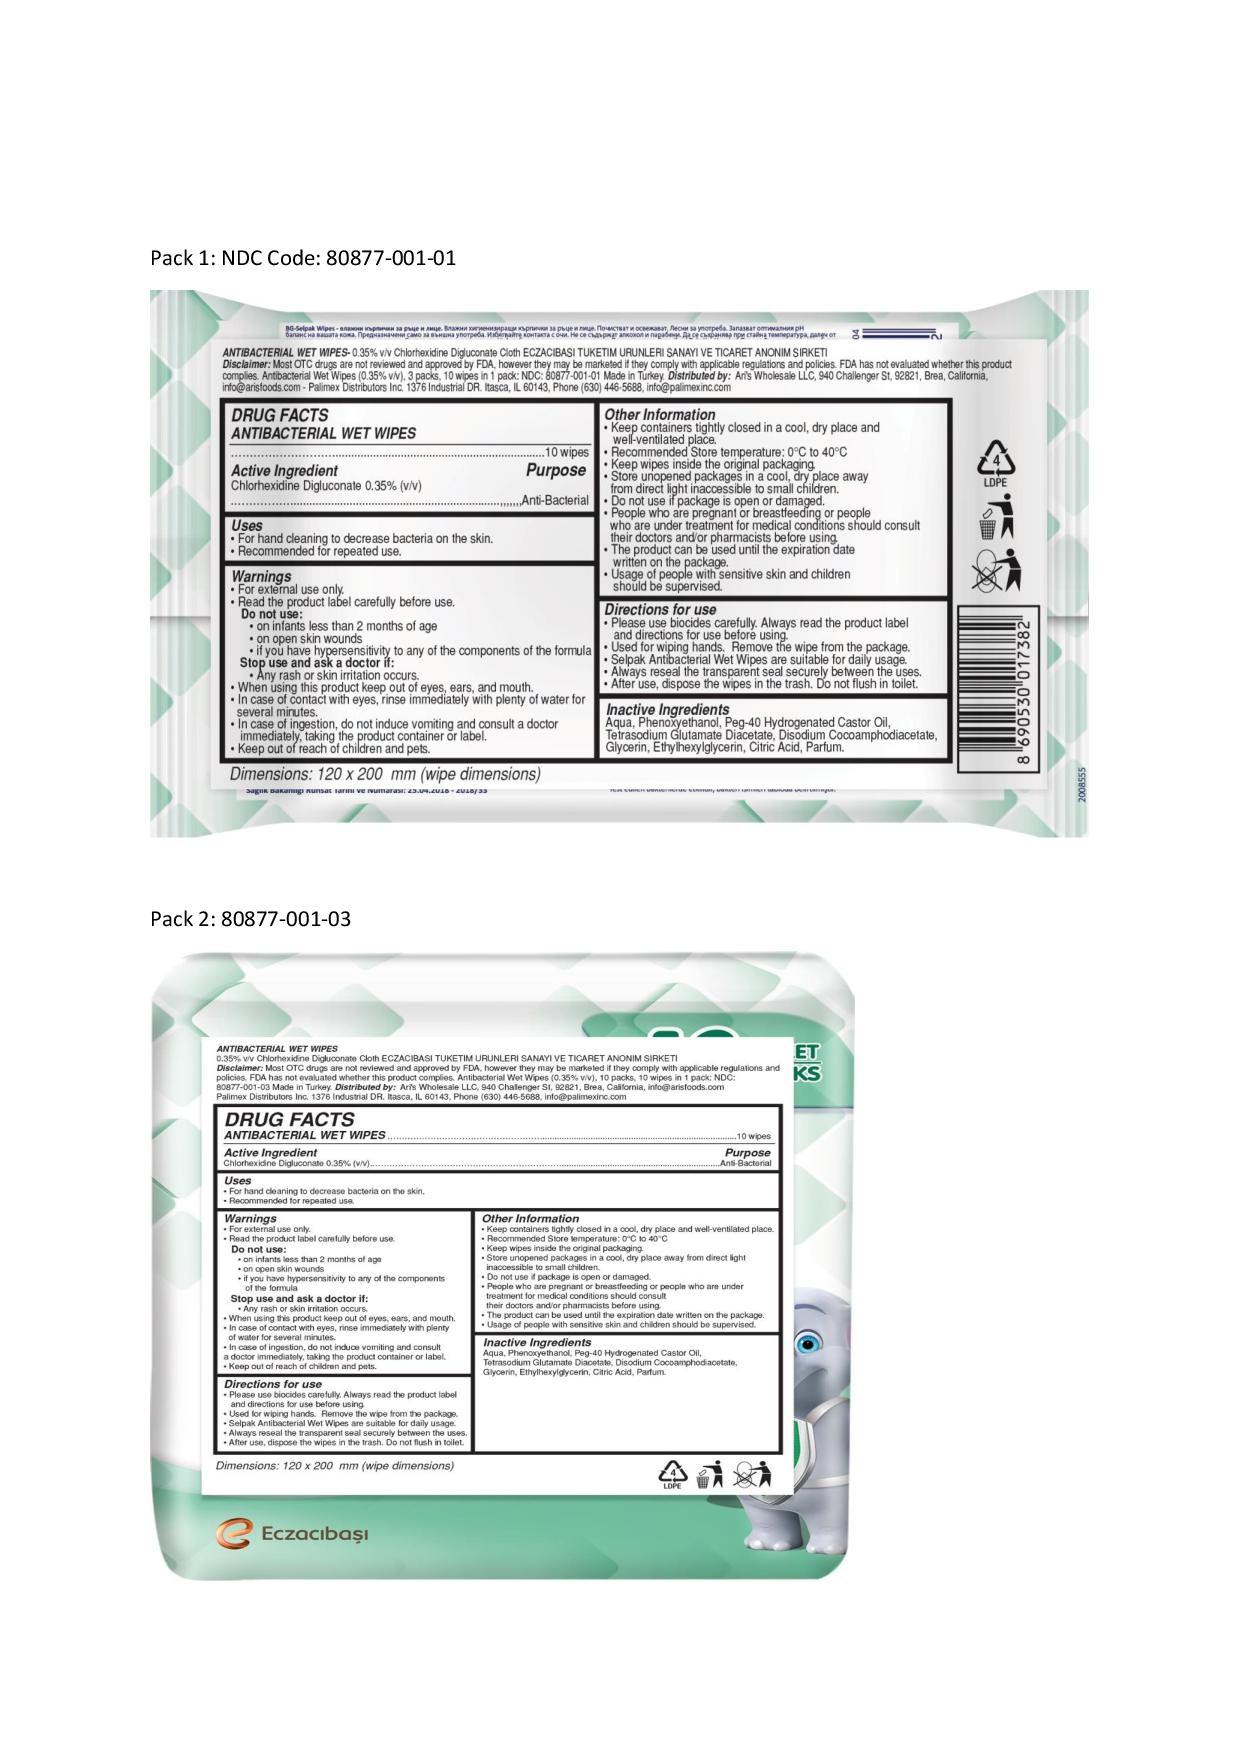 Product label image